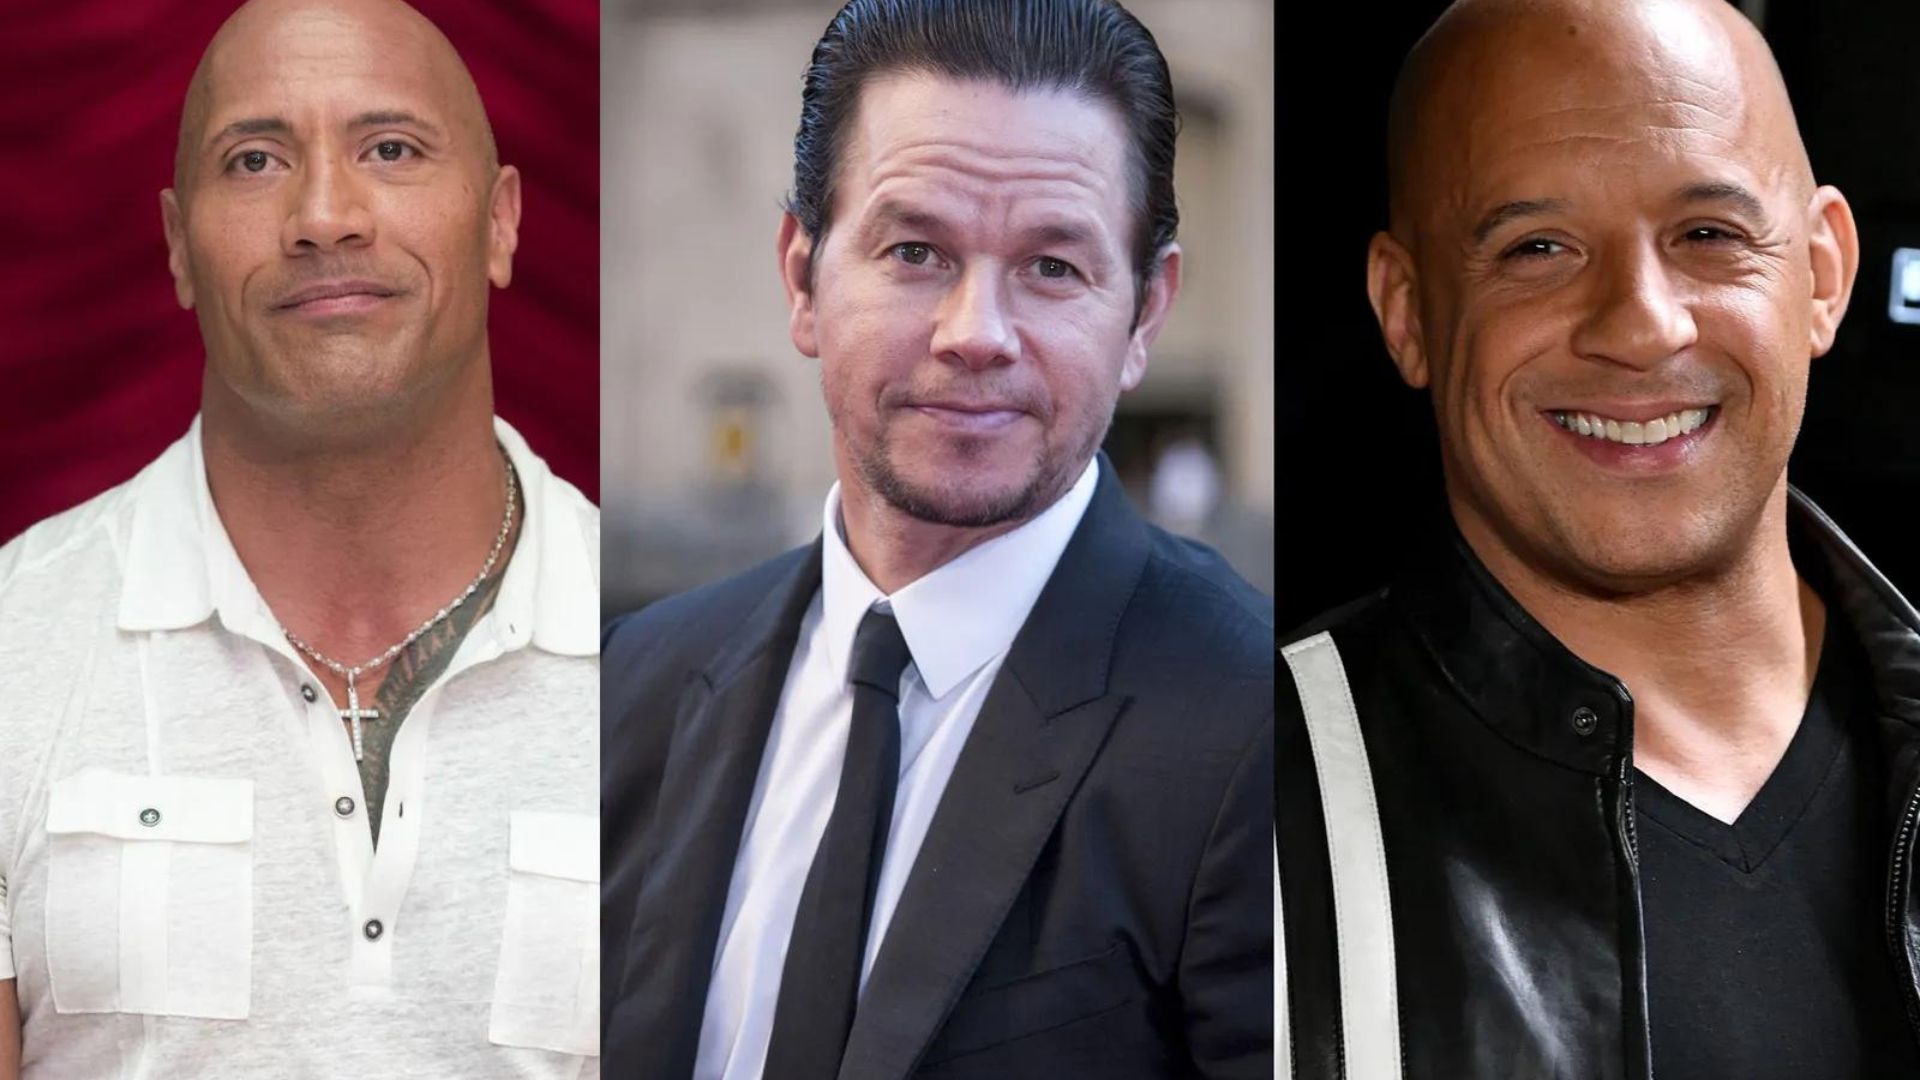 this image shows some of the Highest-Paid Actors in Hollywood